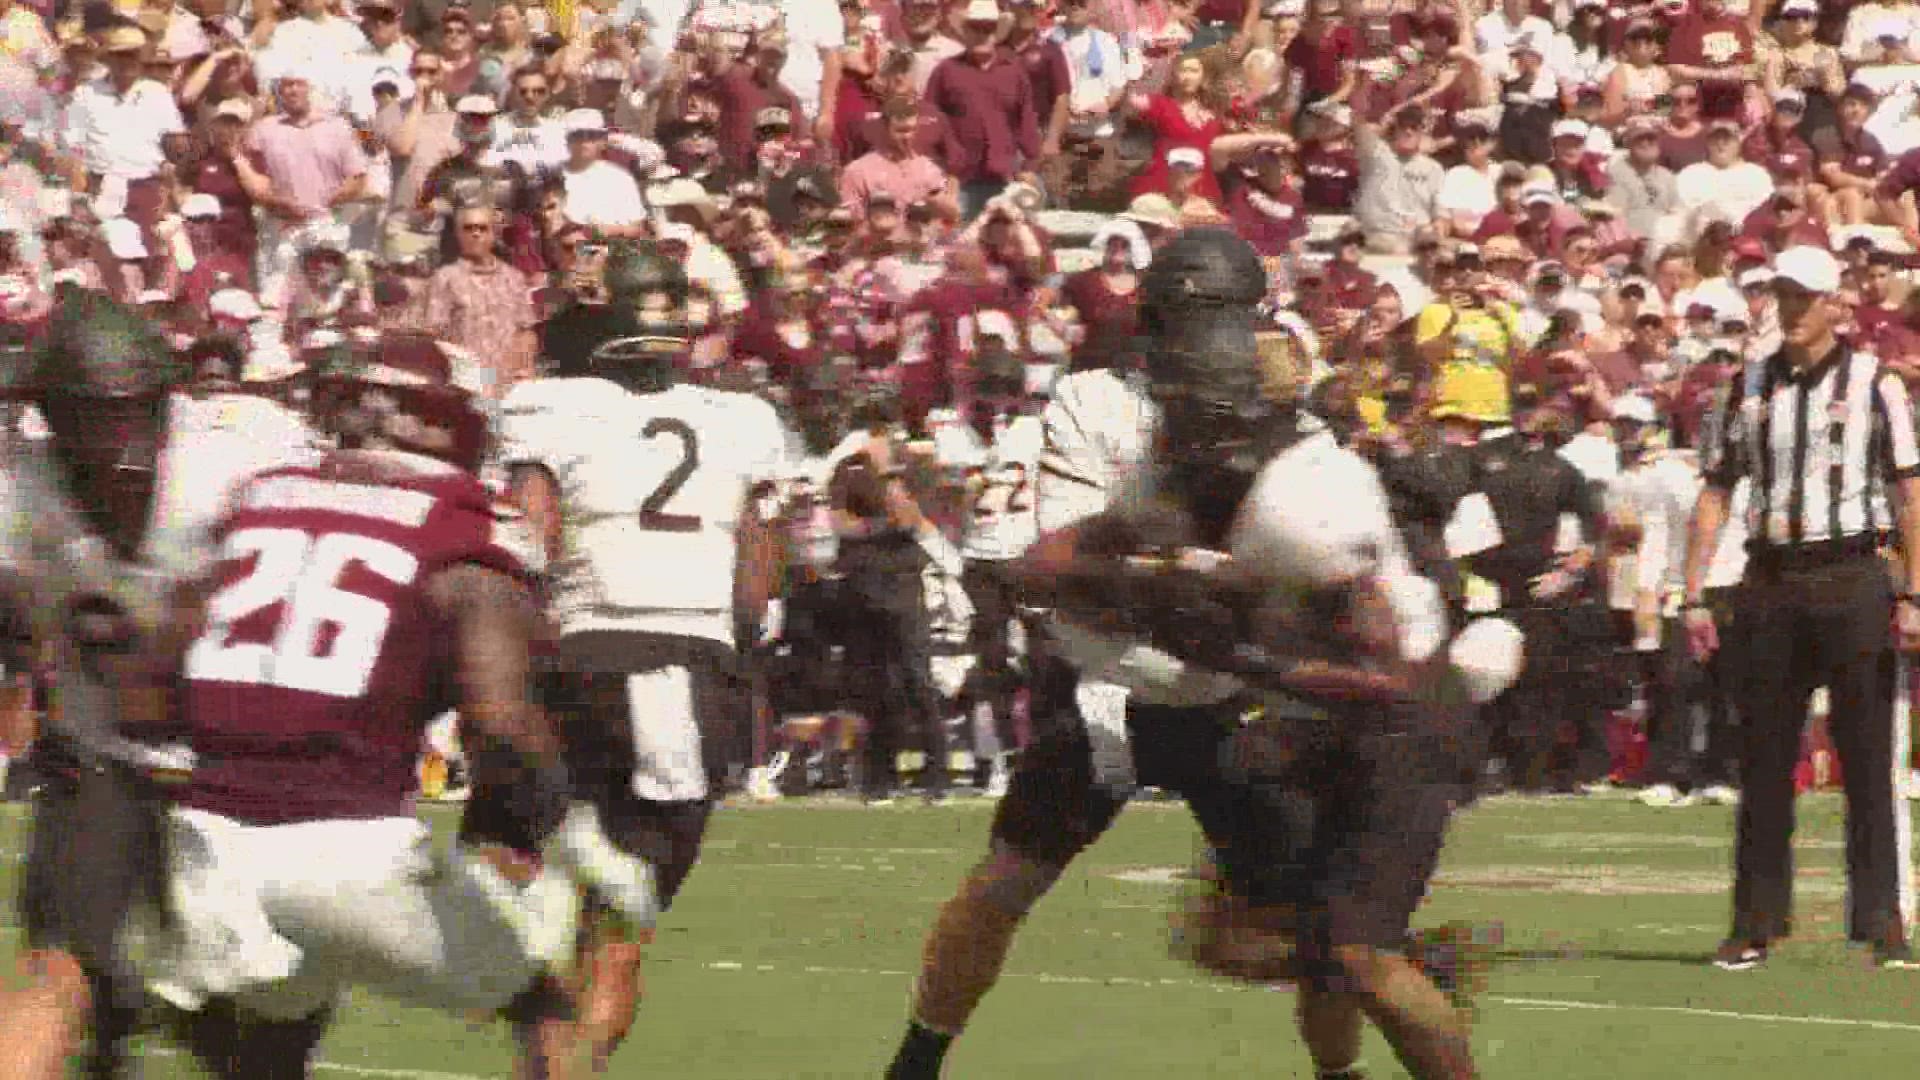 The ugly was Texas A&M's embarrassing loss to App State at home